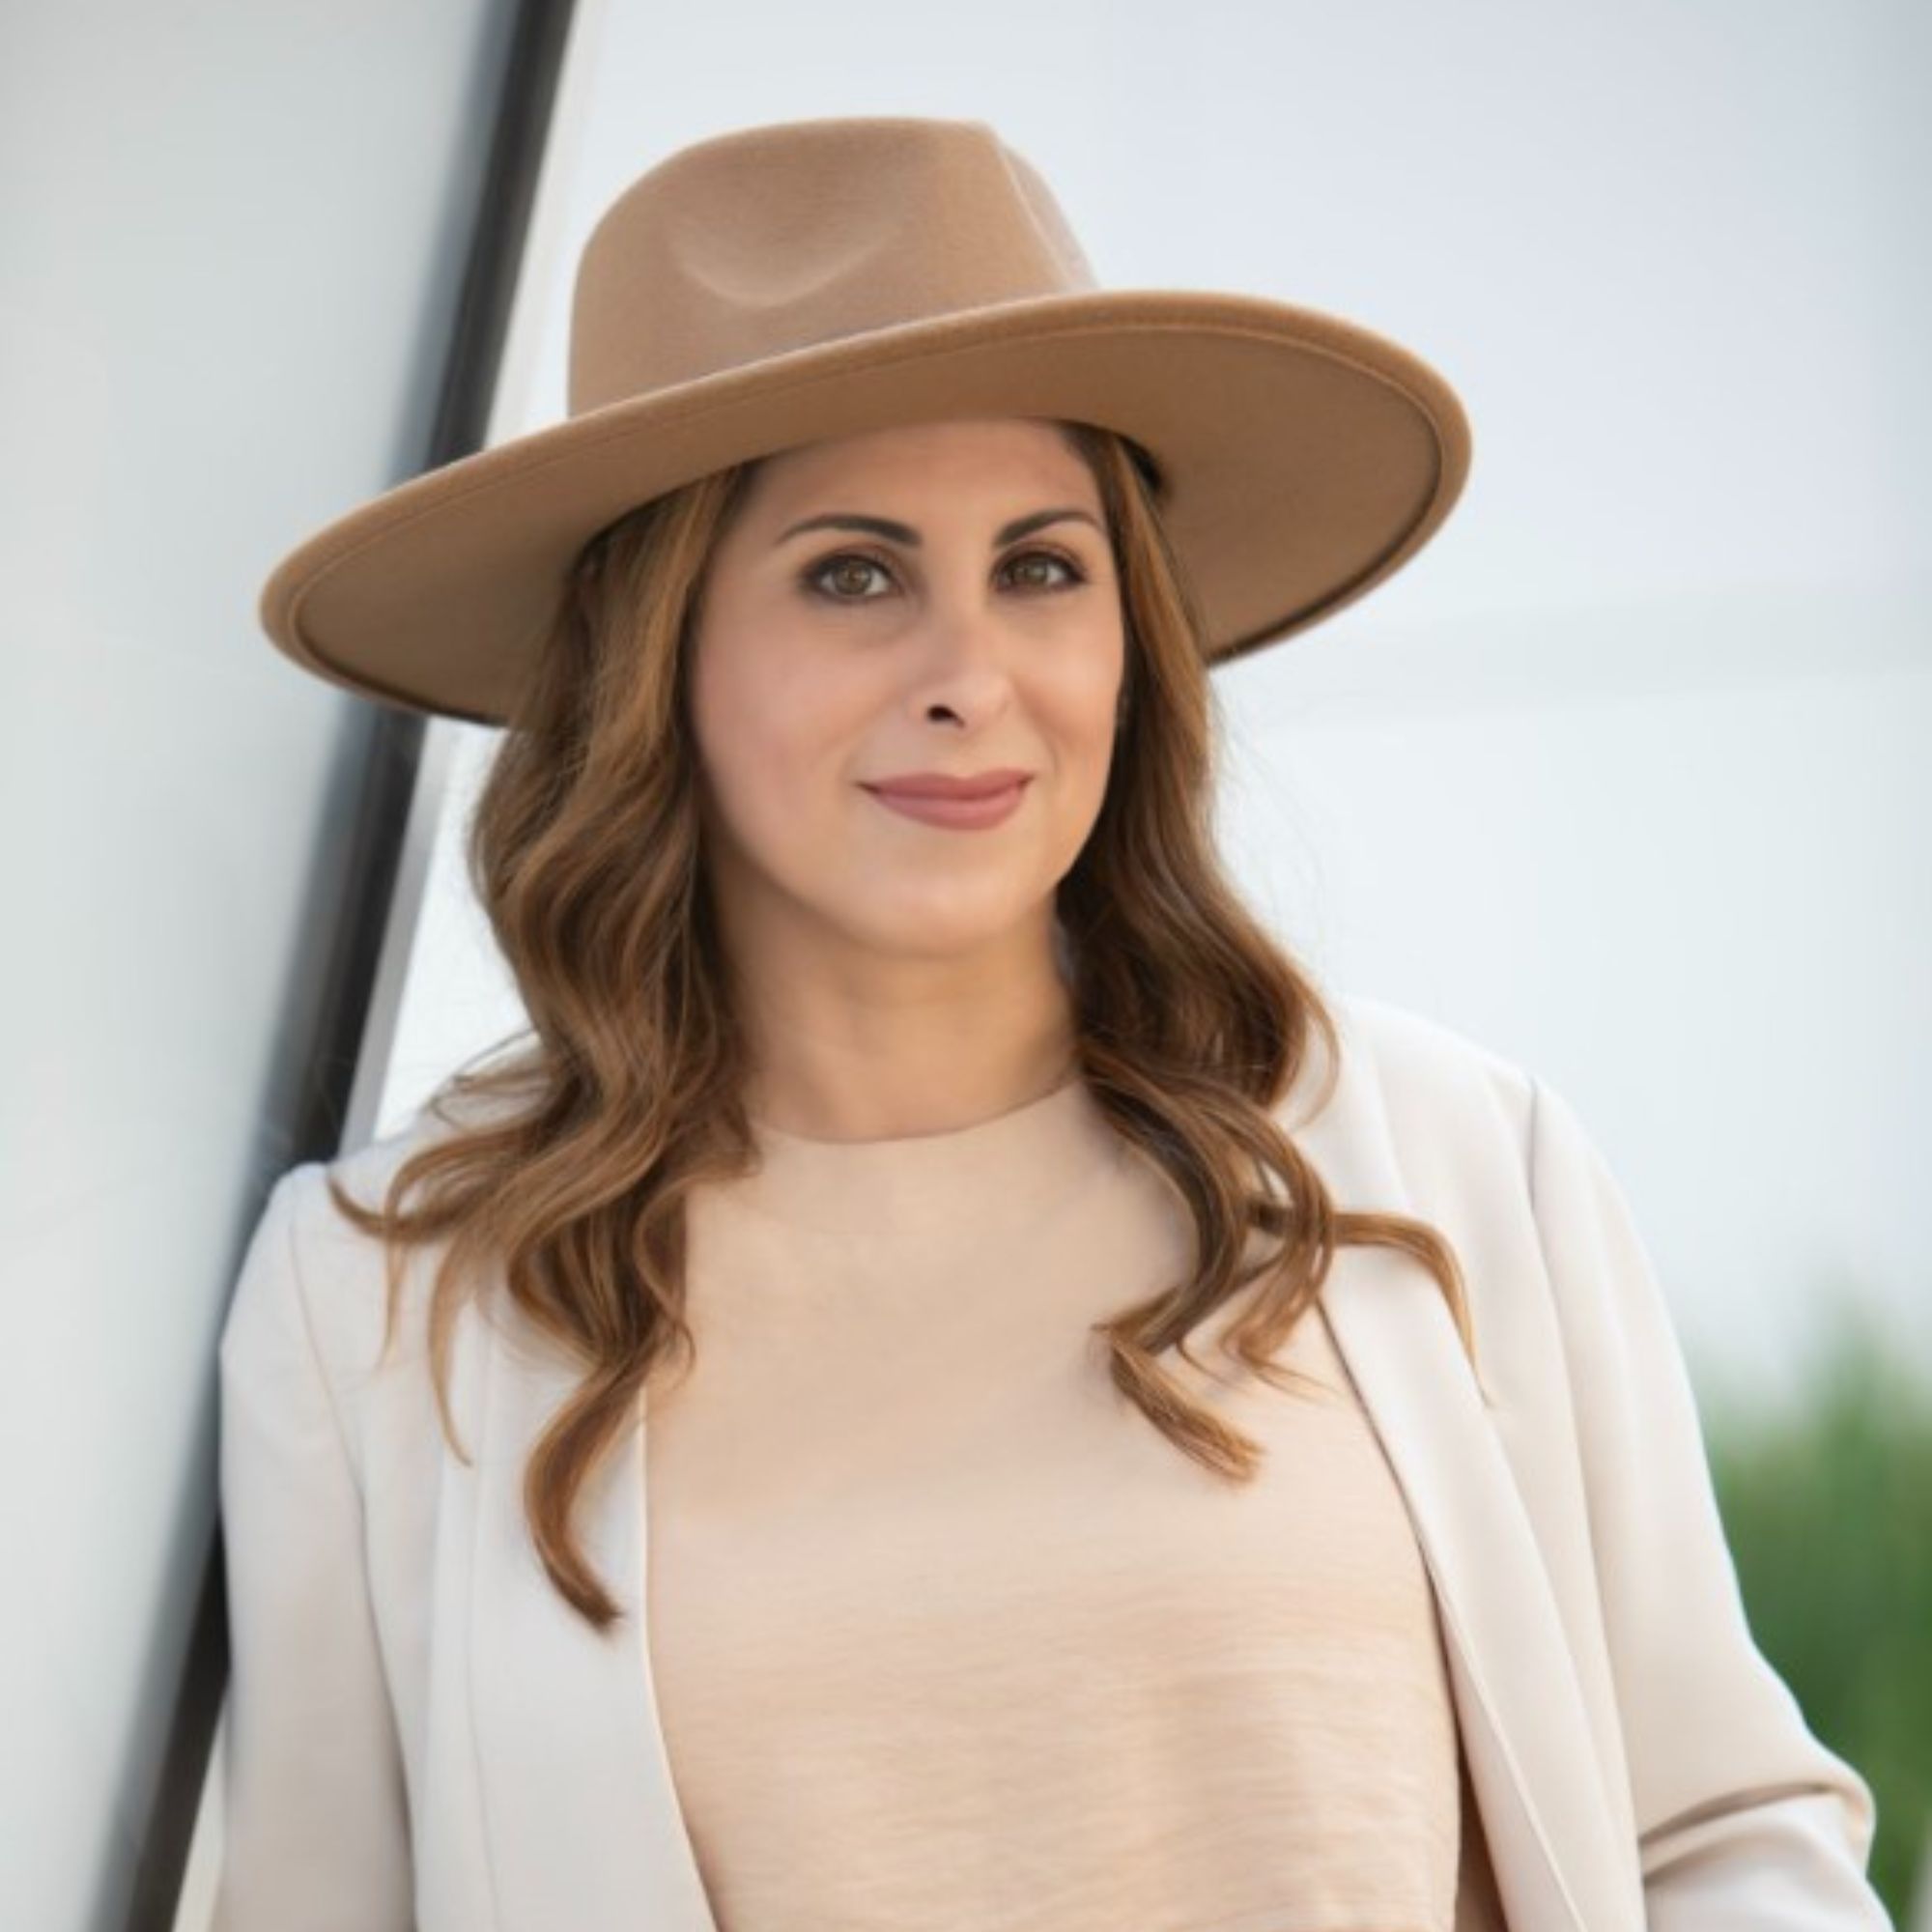 A picture of Reya Duenas, a woman wearing a brown hat, a white cardigan, and beige shirt